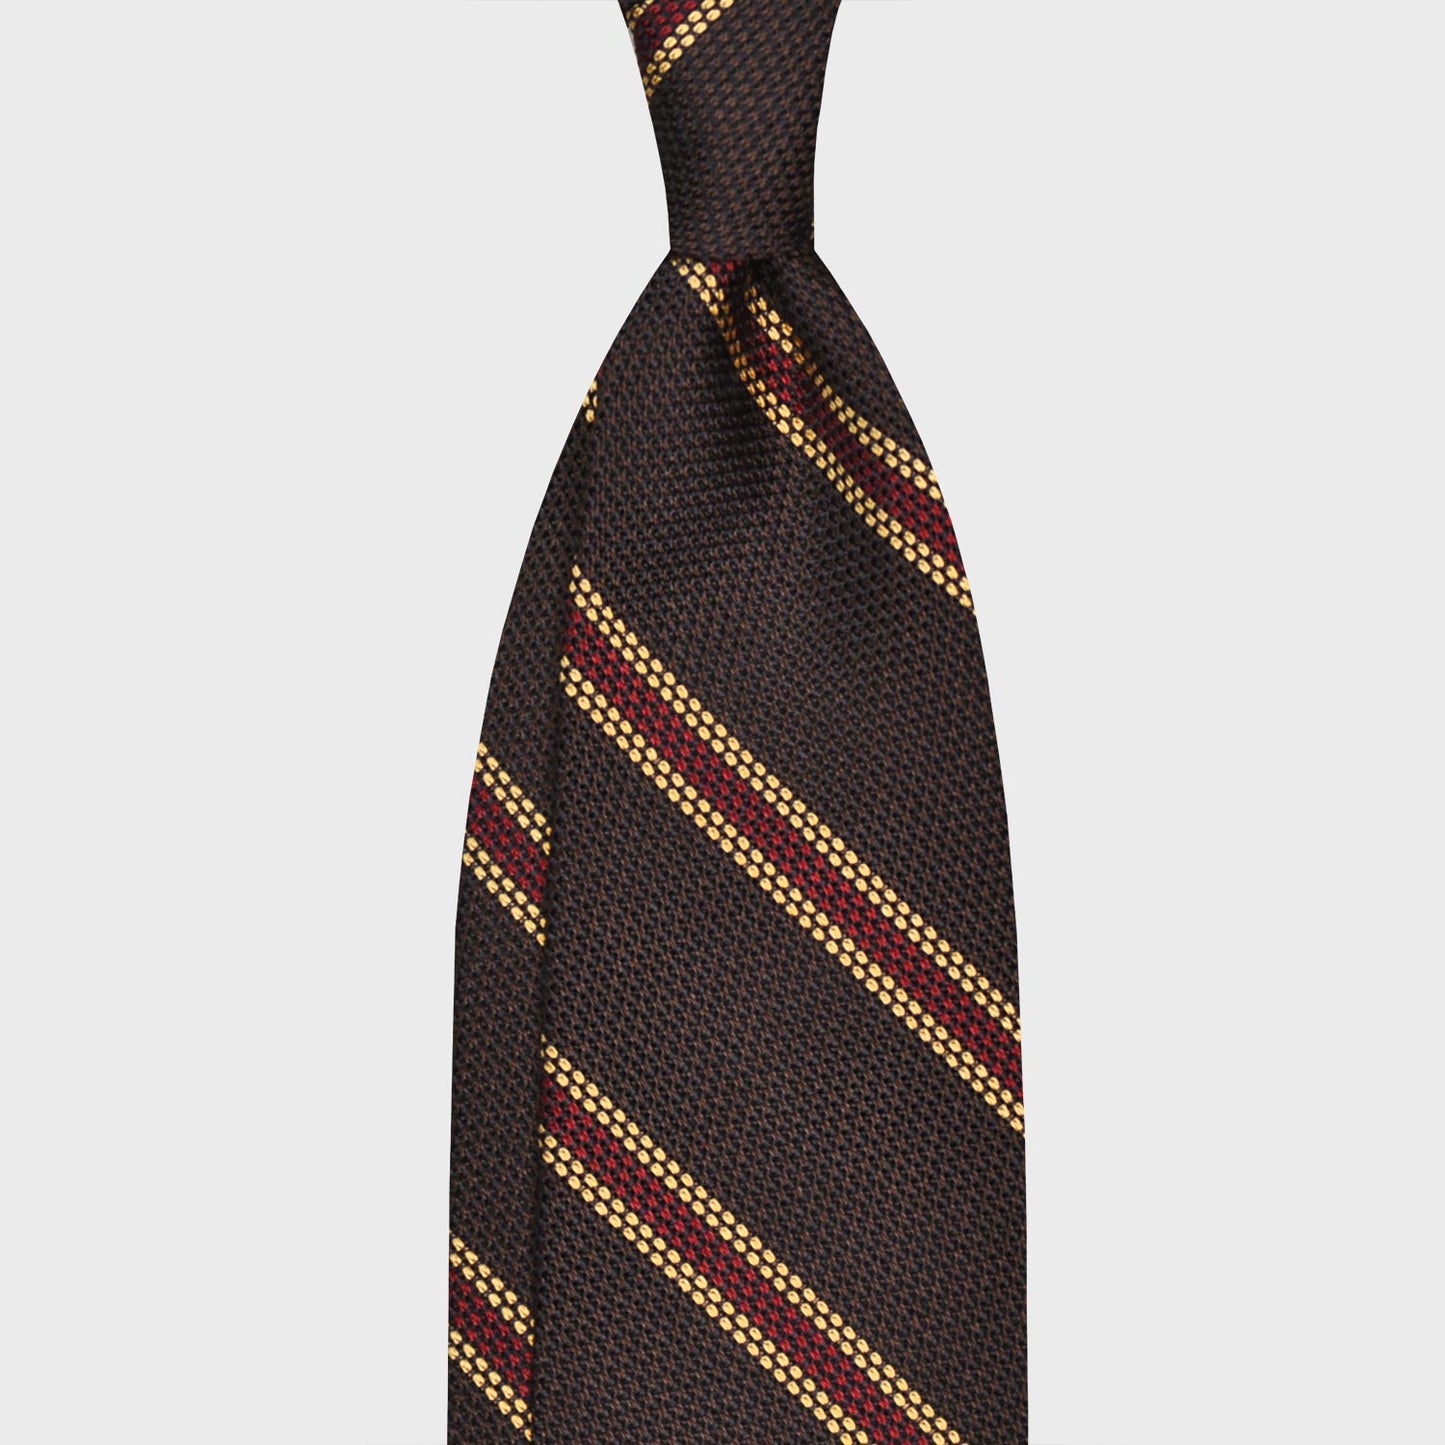 Coffee Brown Striped Grenadine Silk Tie Garza Handmade in Italy. Classic regimental silk tie, F.Marino Napoli exclusive for Wools Boutique Uomo, hand rolled edge, unlined 3 folds, handmade with refined grenadine silk, coffee brown background with red ruby and yellow gold colors striped